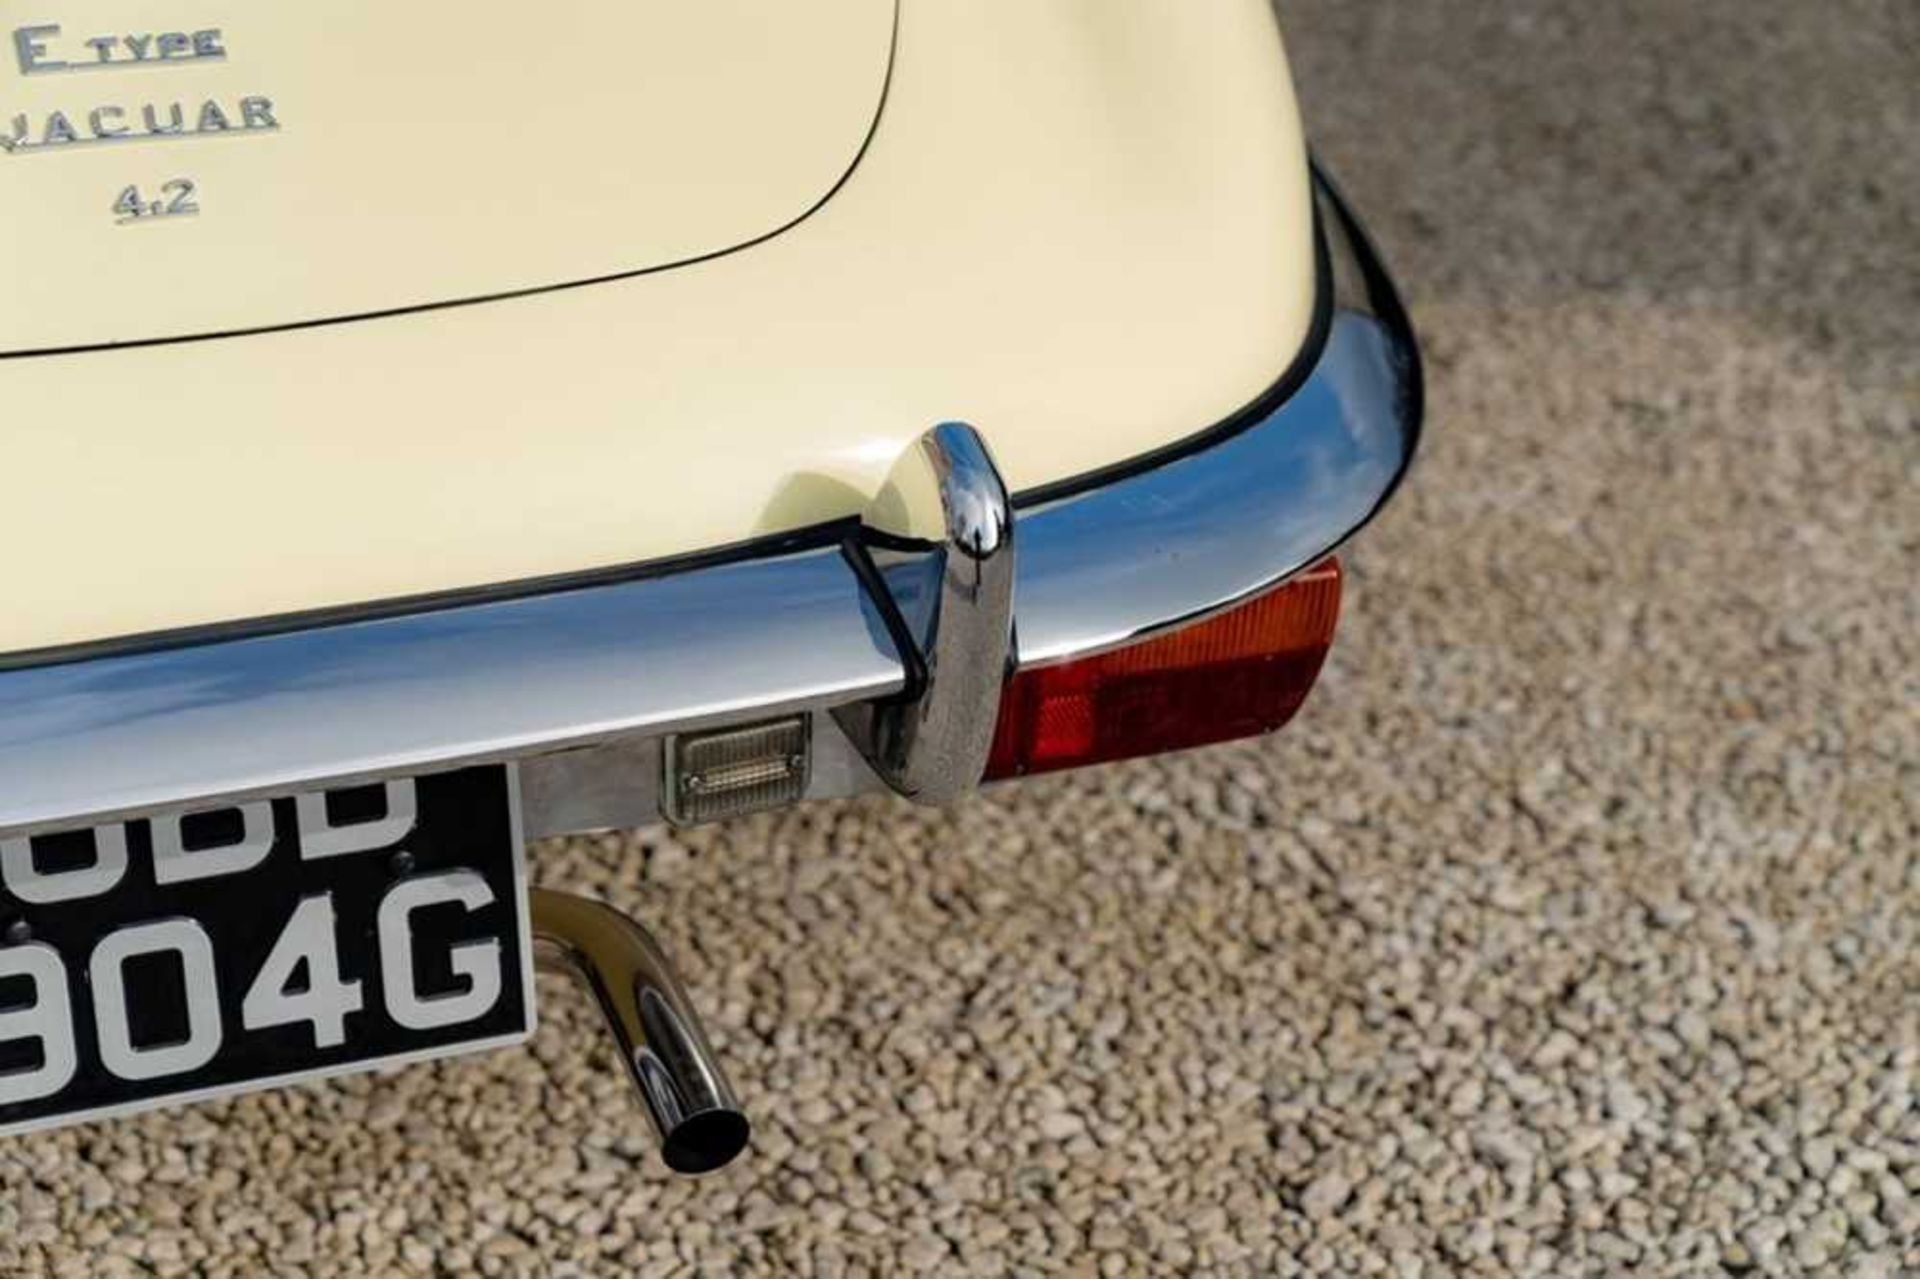 1968 Jaguar E-Type 4.2 Litre Coupe Genuine 44,000 miles from new - Image 20 of 68